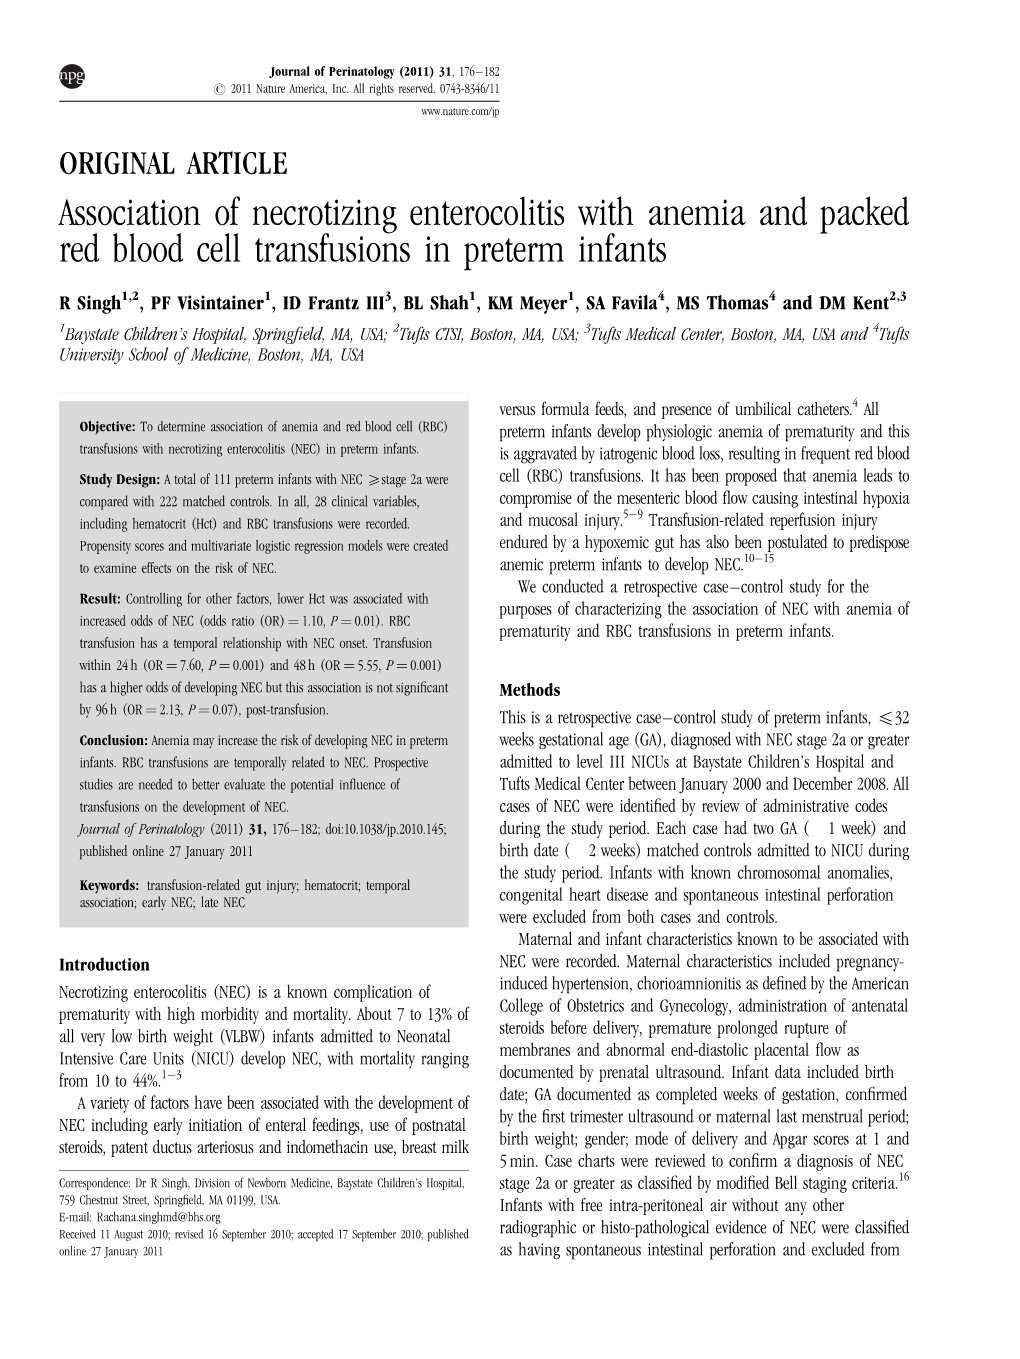 Association of Necrotizing Enterocolitis with Anemia and Packed Red Blood Cell Transfusions in Preterm Infants